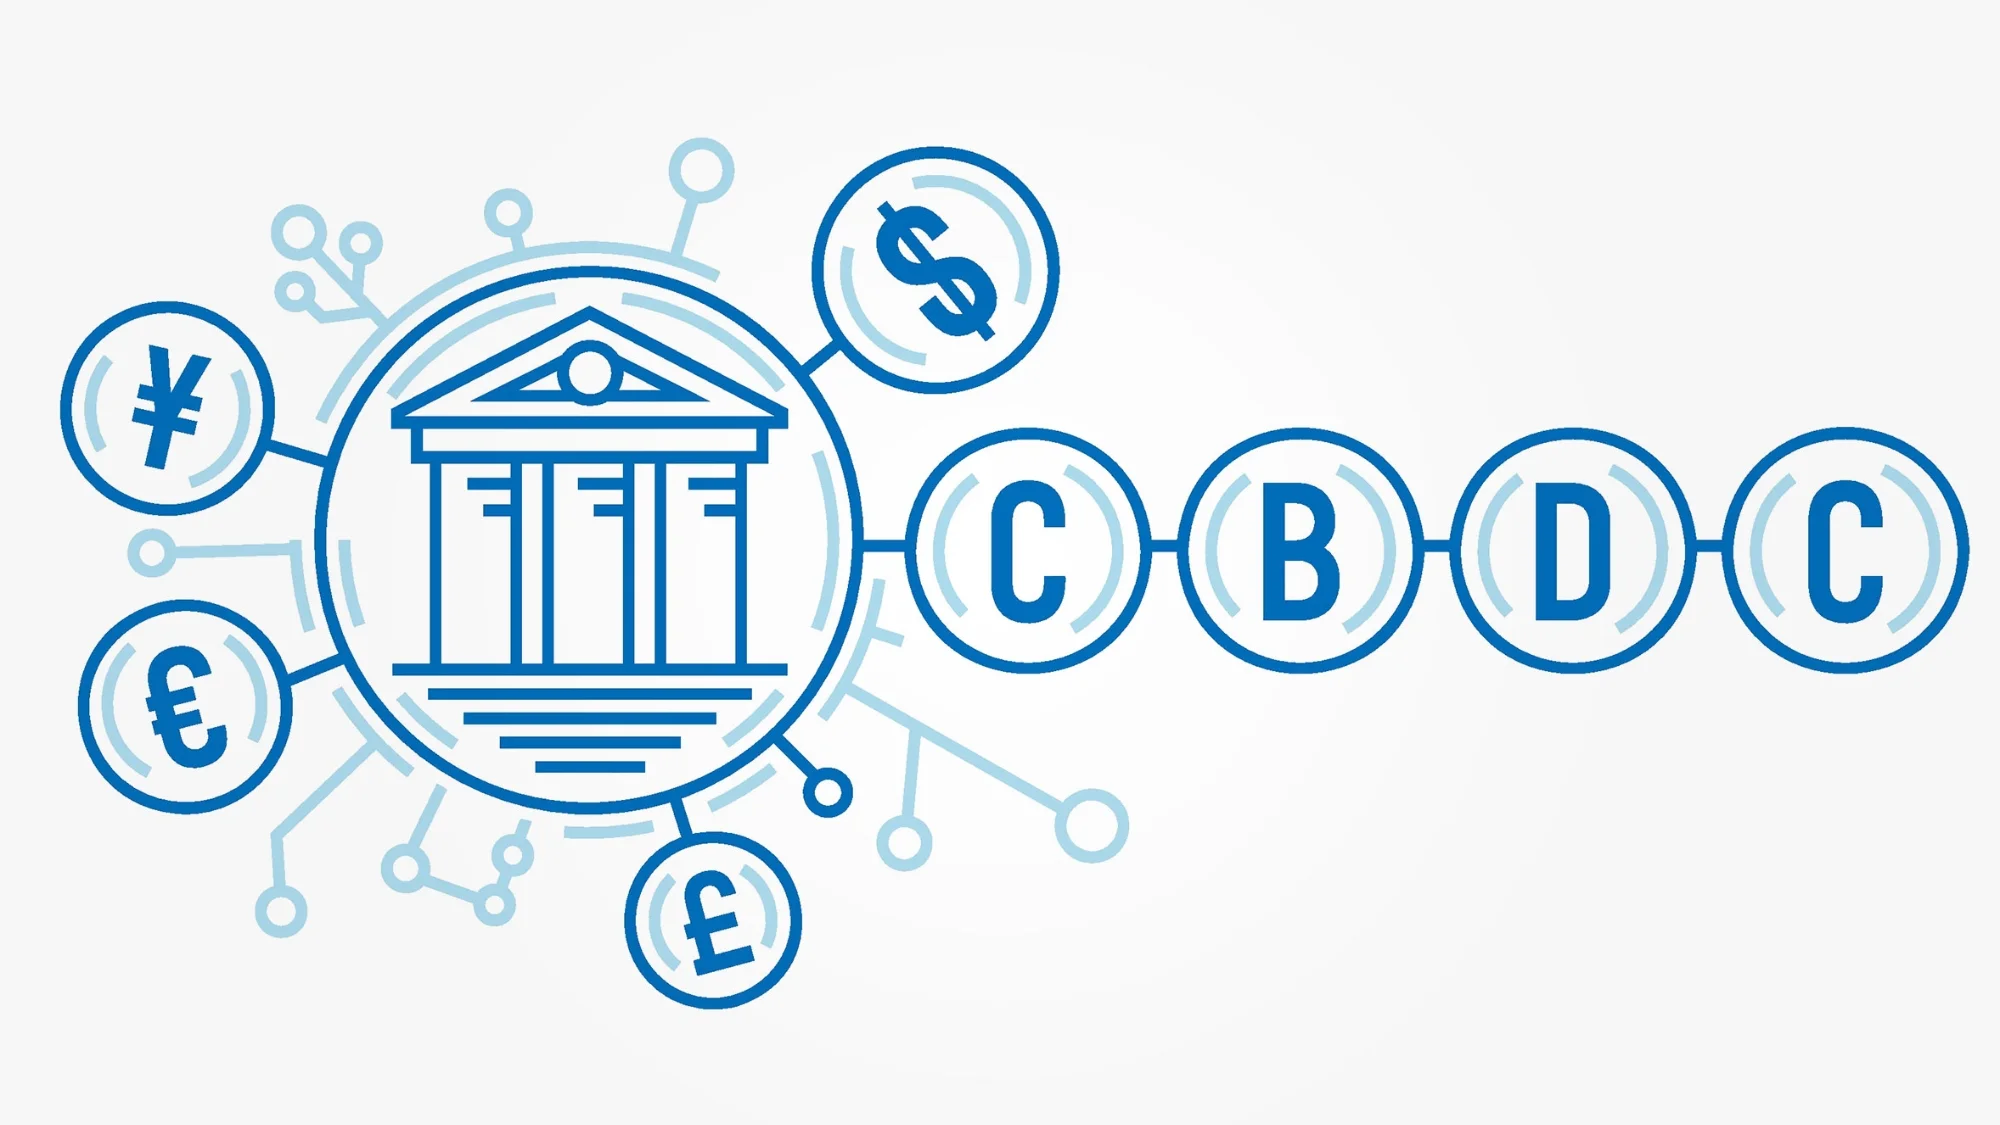 benefits-of-central-bank-digital-currency-1